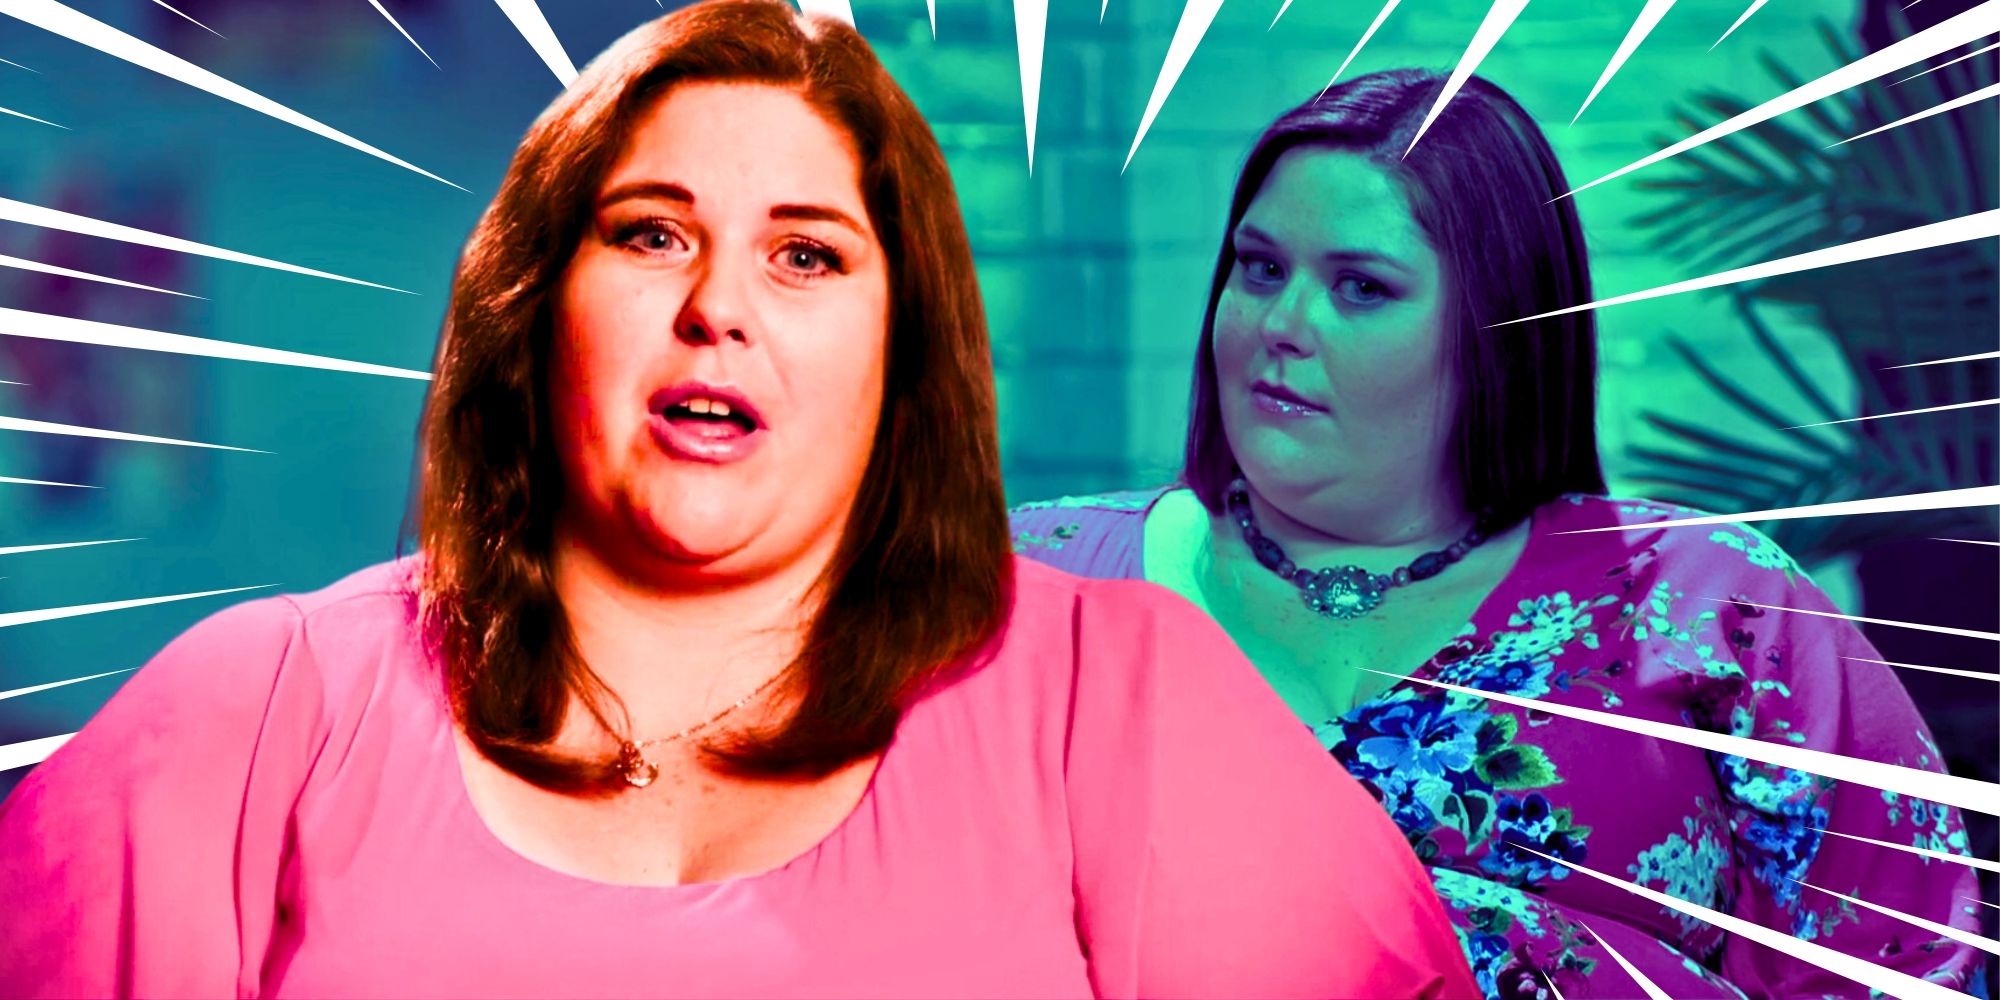 Montage Of Ella Johnson 90 Day Fiancé Before the 90 Days season 5 wearing pink top